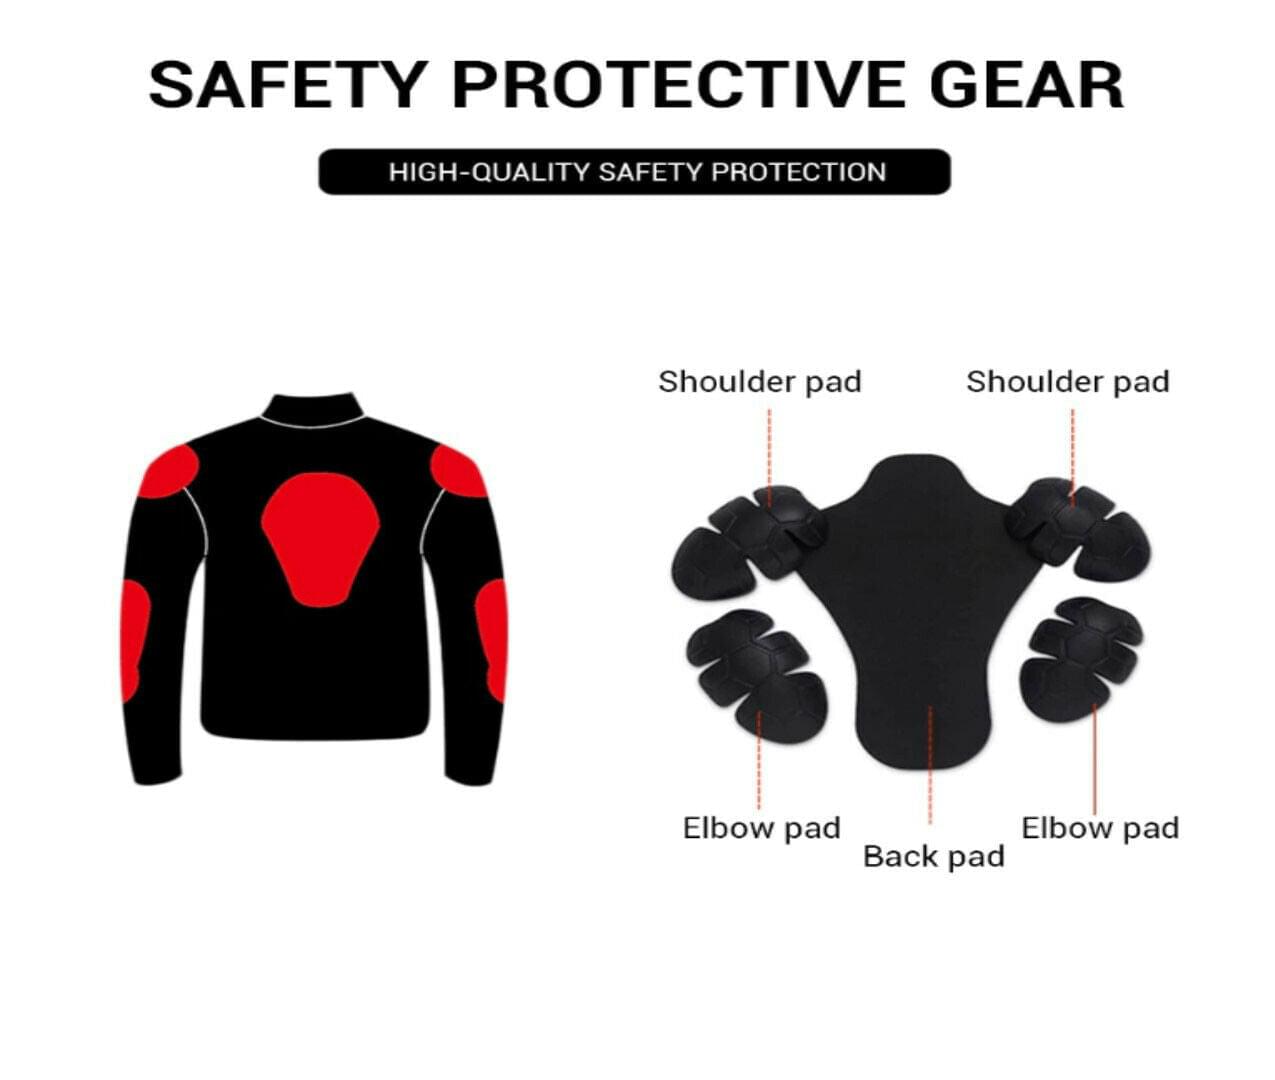 Custom Designed Protective Jacket with CE Certified Protections for Motorcycle Riders by Milo Racing - Unisex